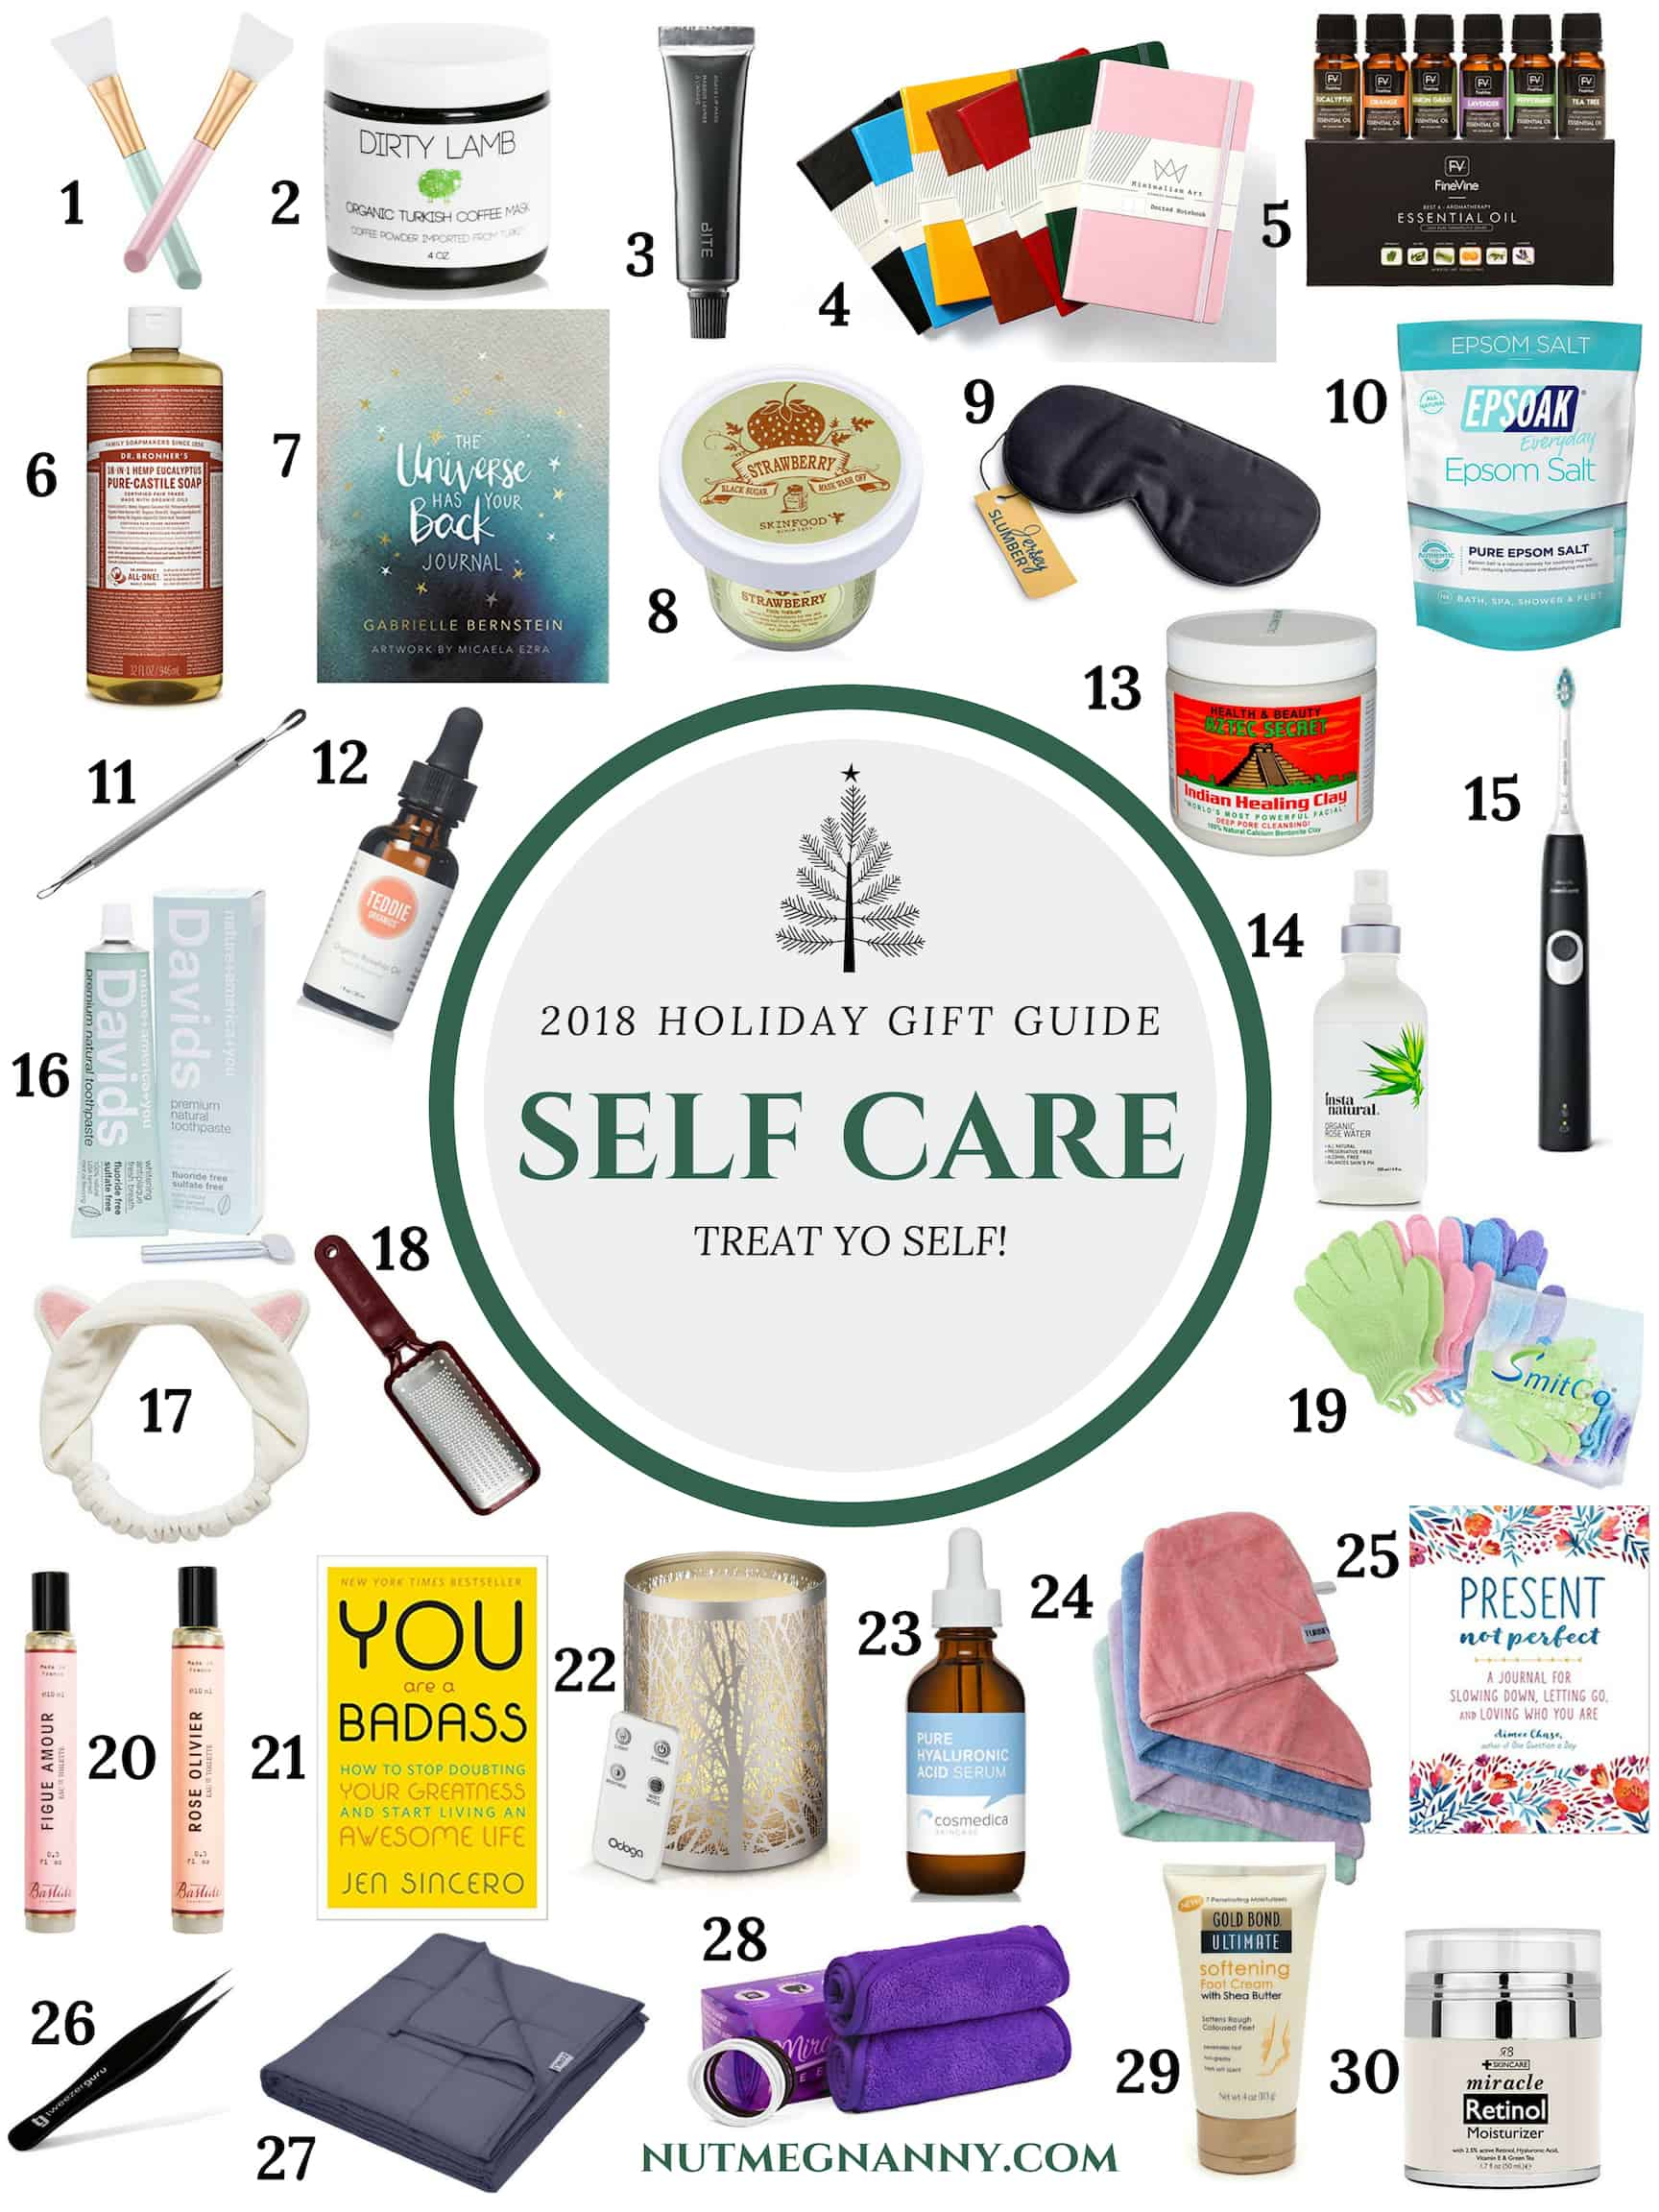 2018 Self Care Gift Guide from Nutmeg Nanny - all the gifts you need to TREAT YO SELF!